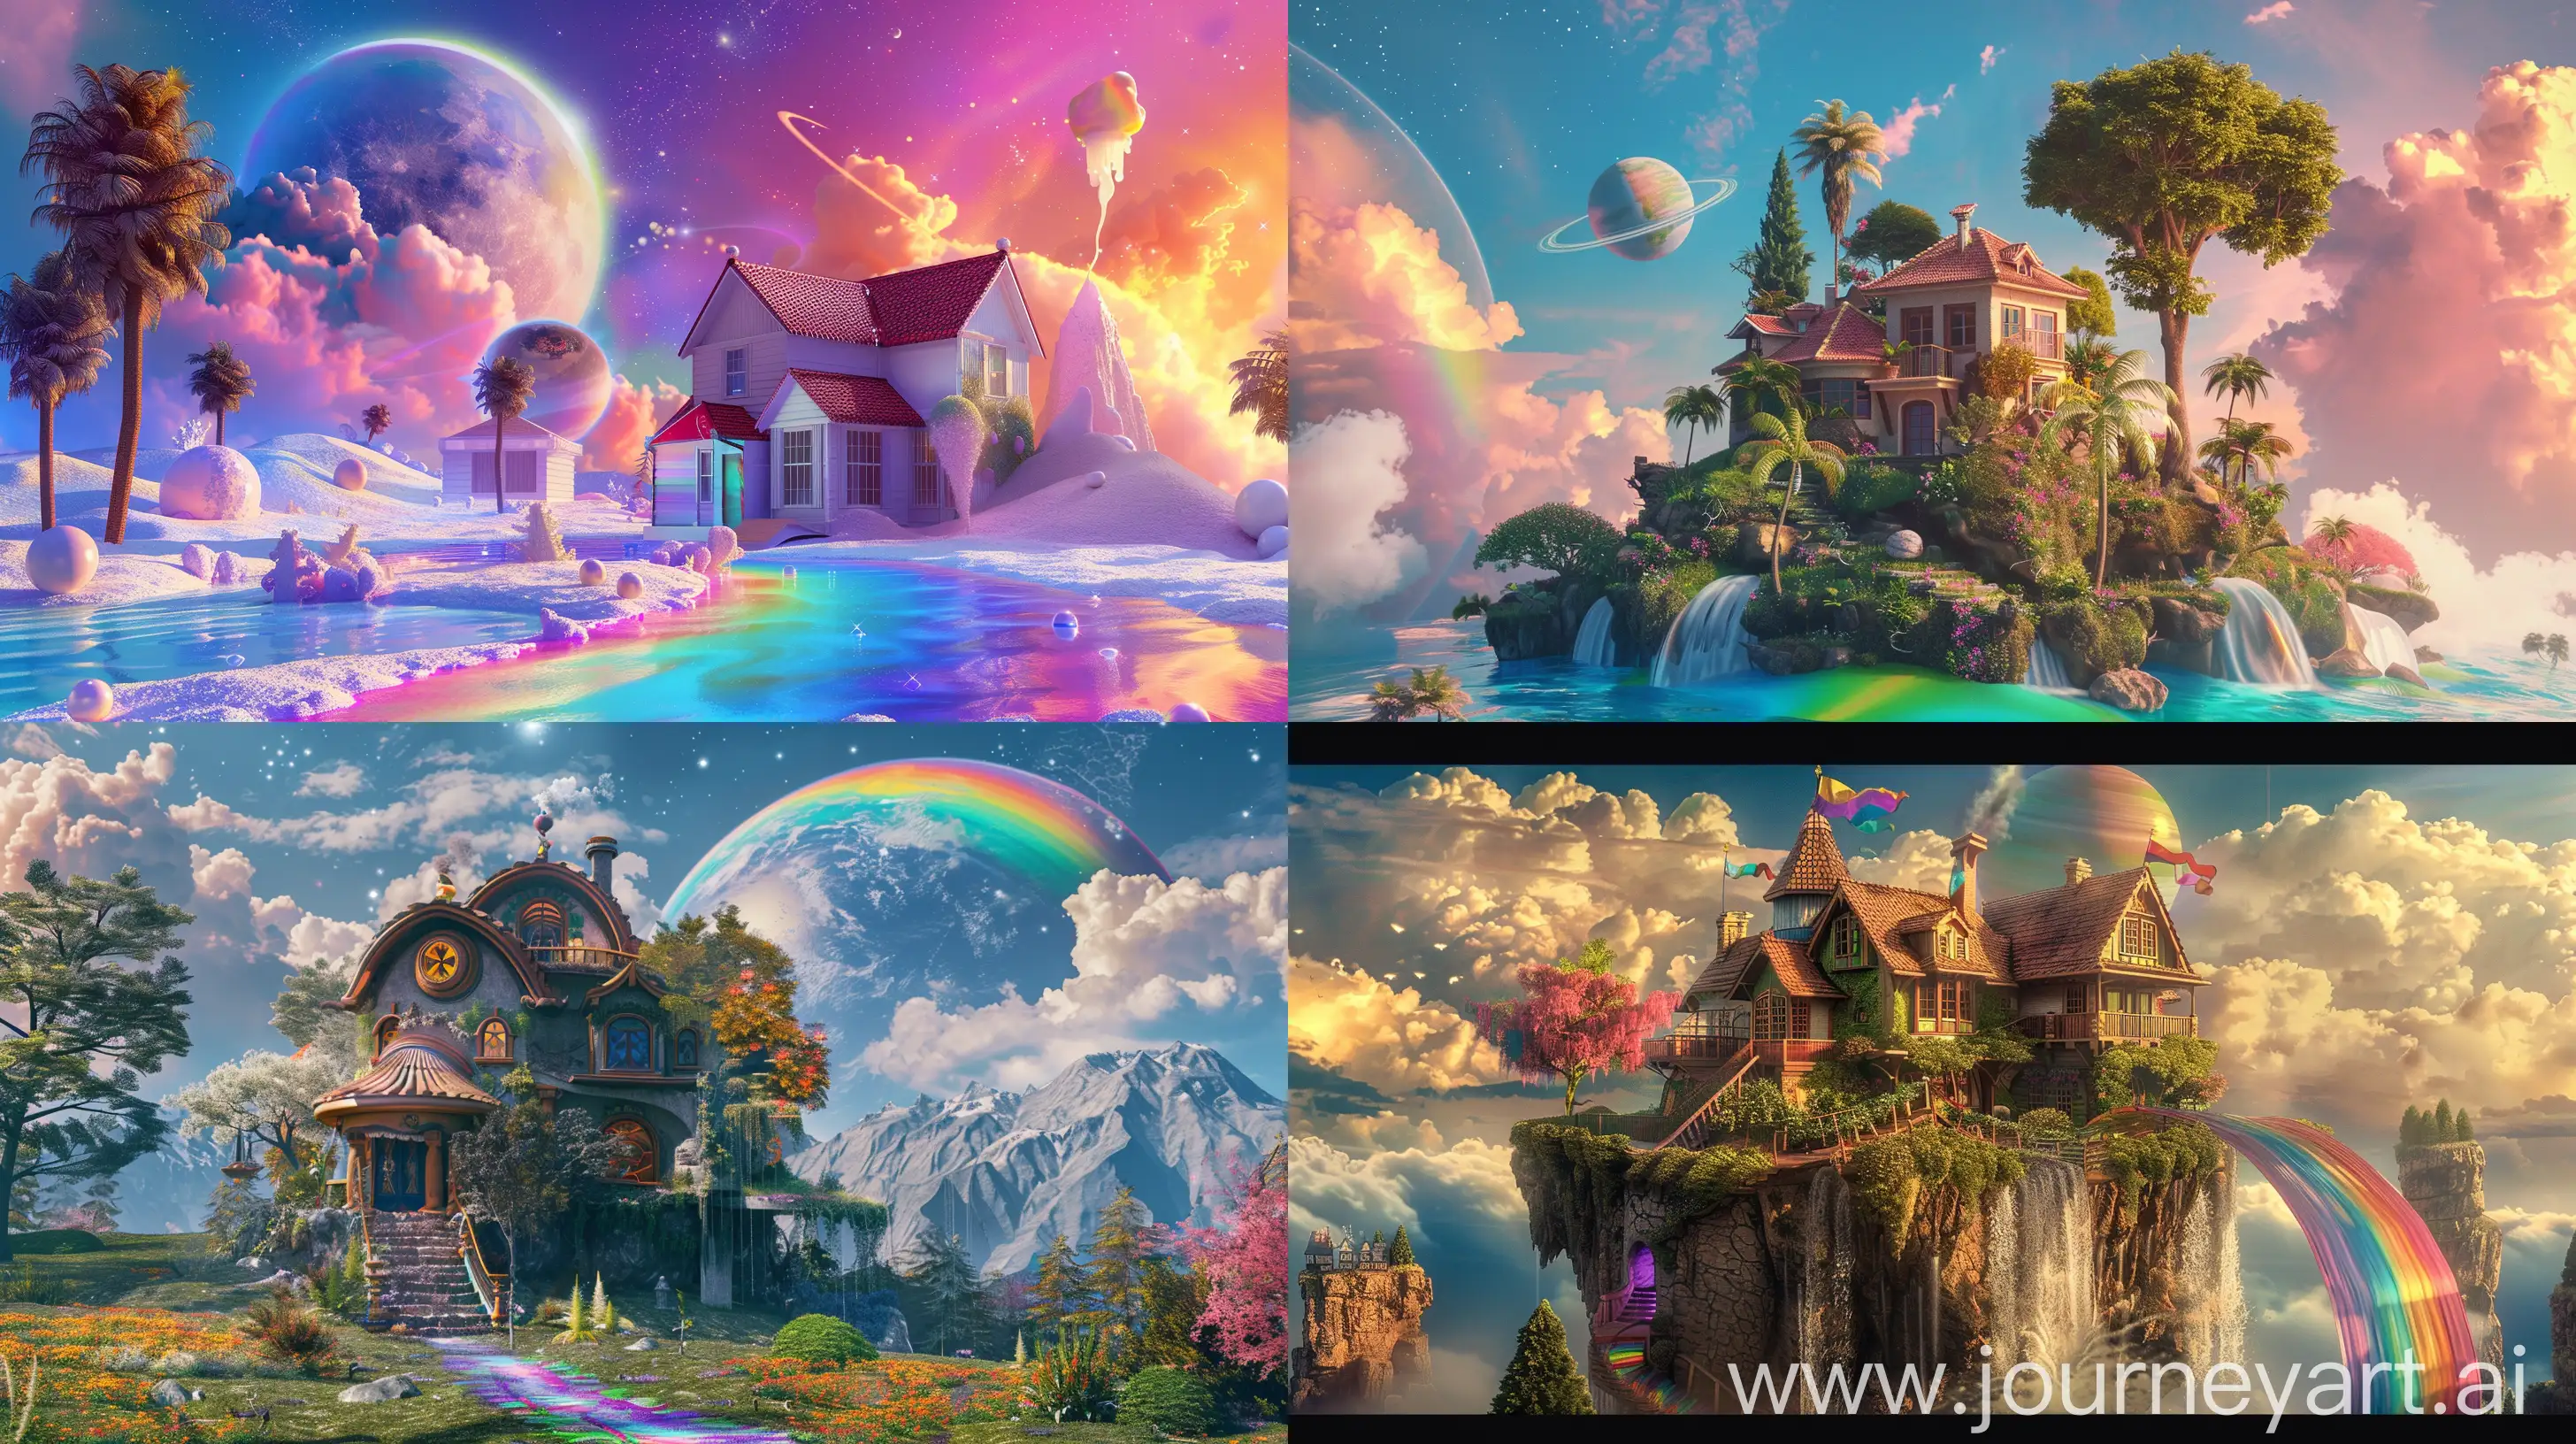 Fantasy-House-on-a-Colorful-Planet-with-Rainbow-Milk-Rivers